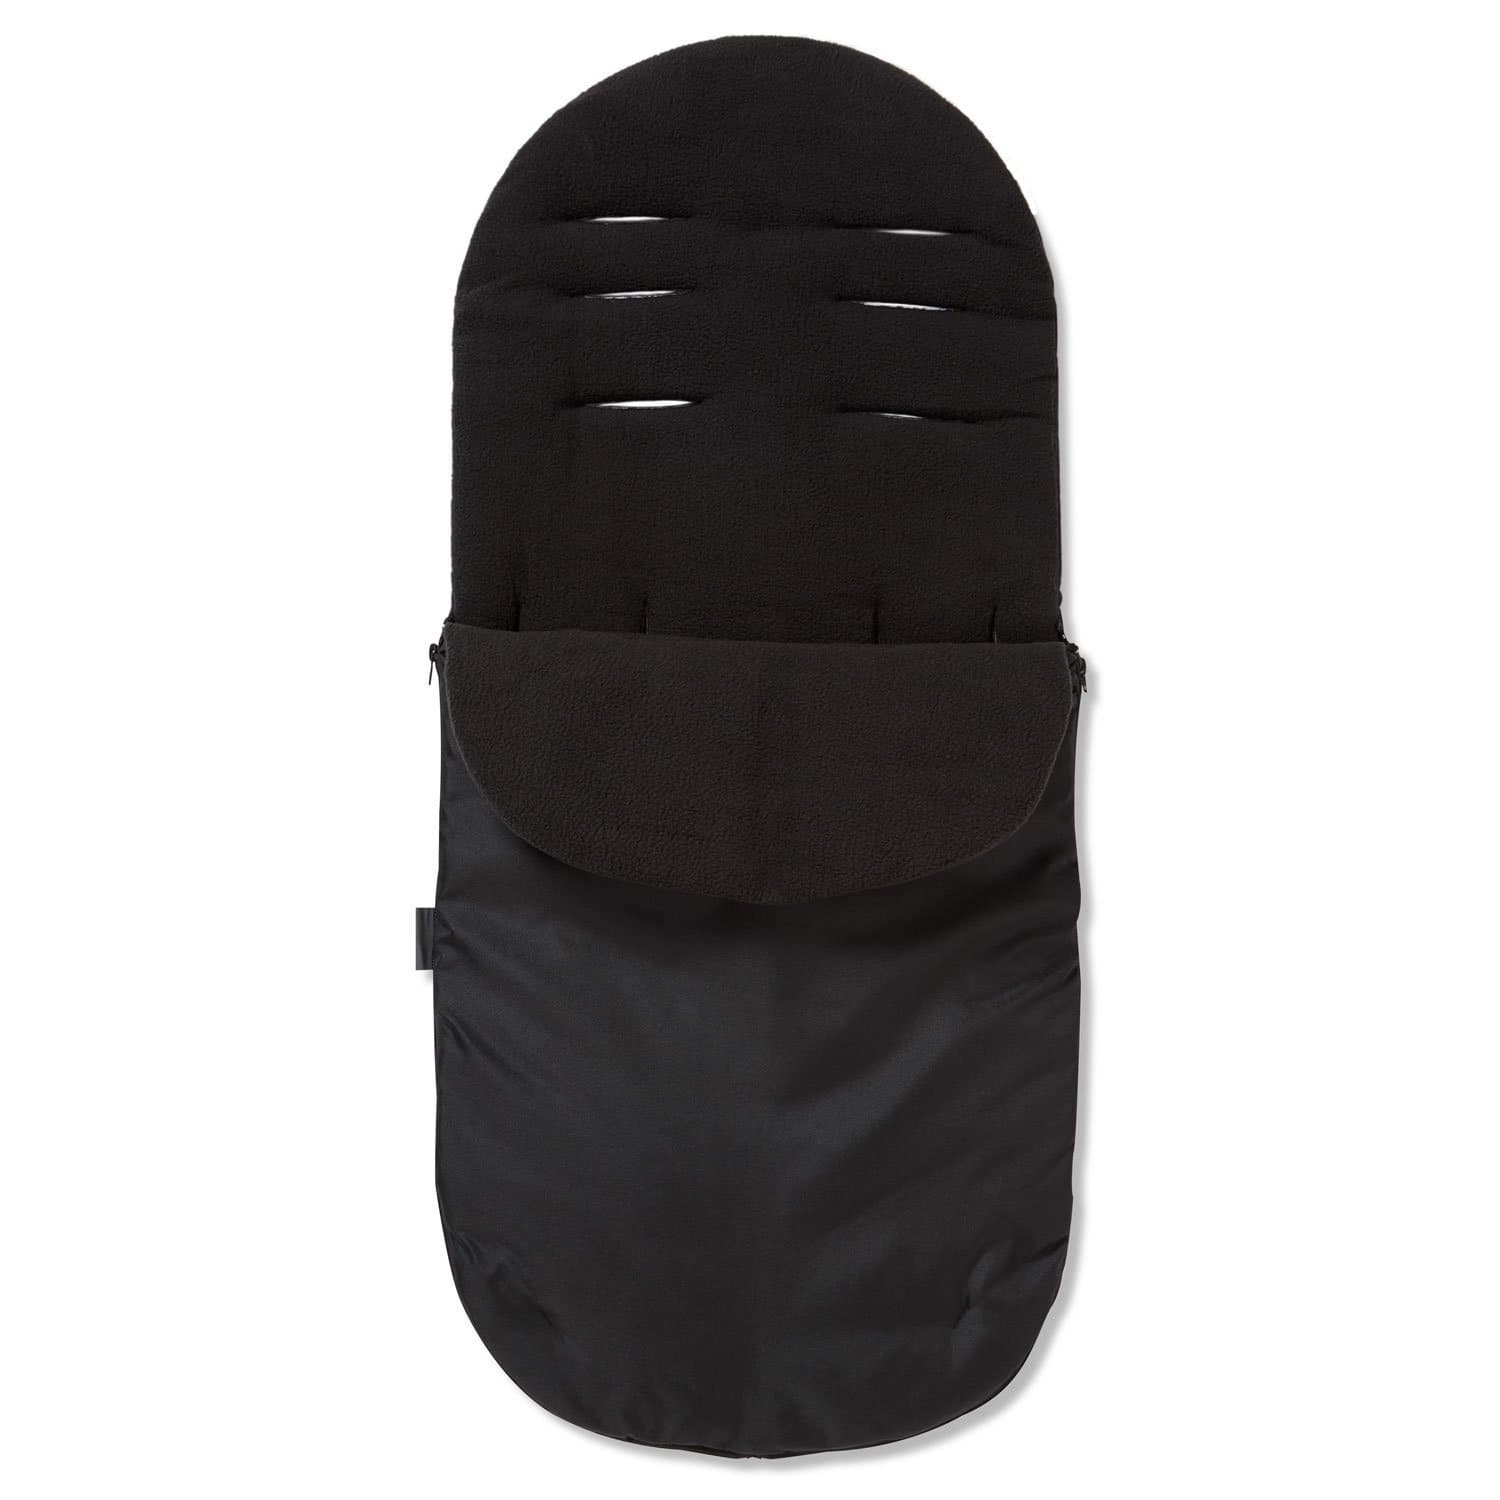 Footmuff / Cosy Toes Compatible with Nurse - Black / Fits All Models | For Your Little One